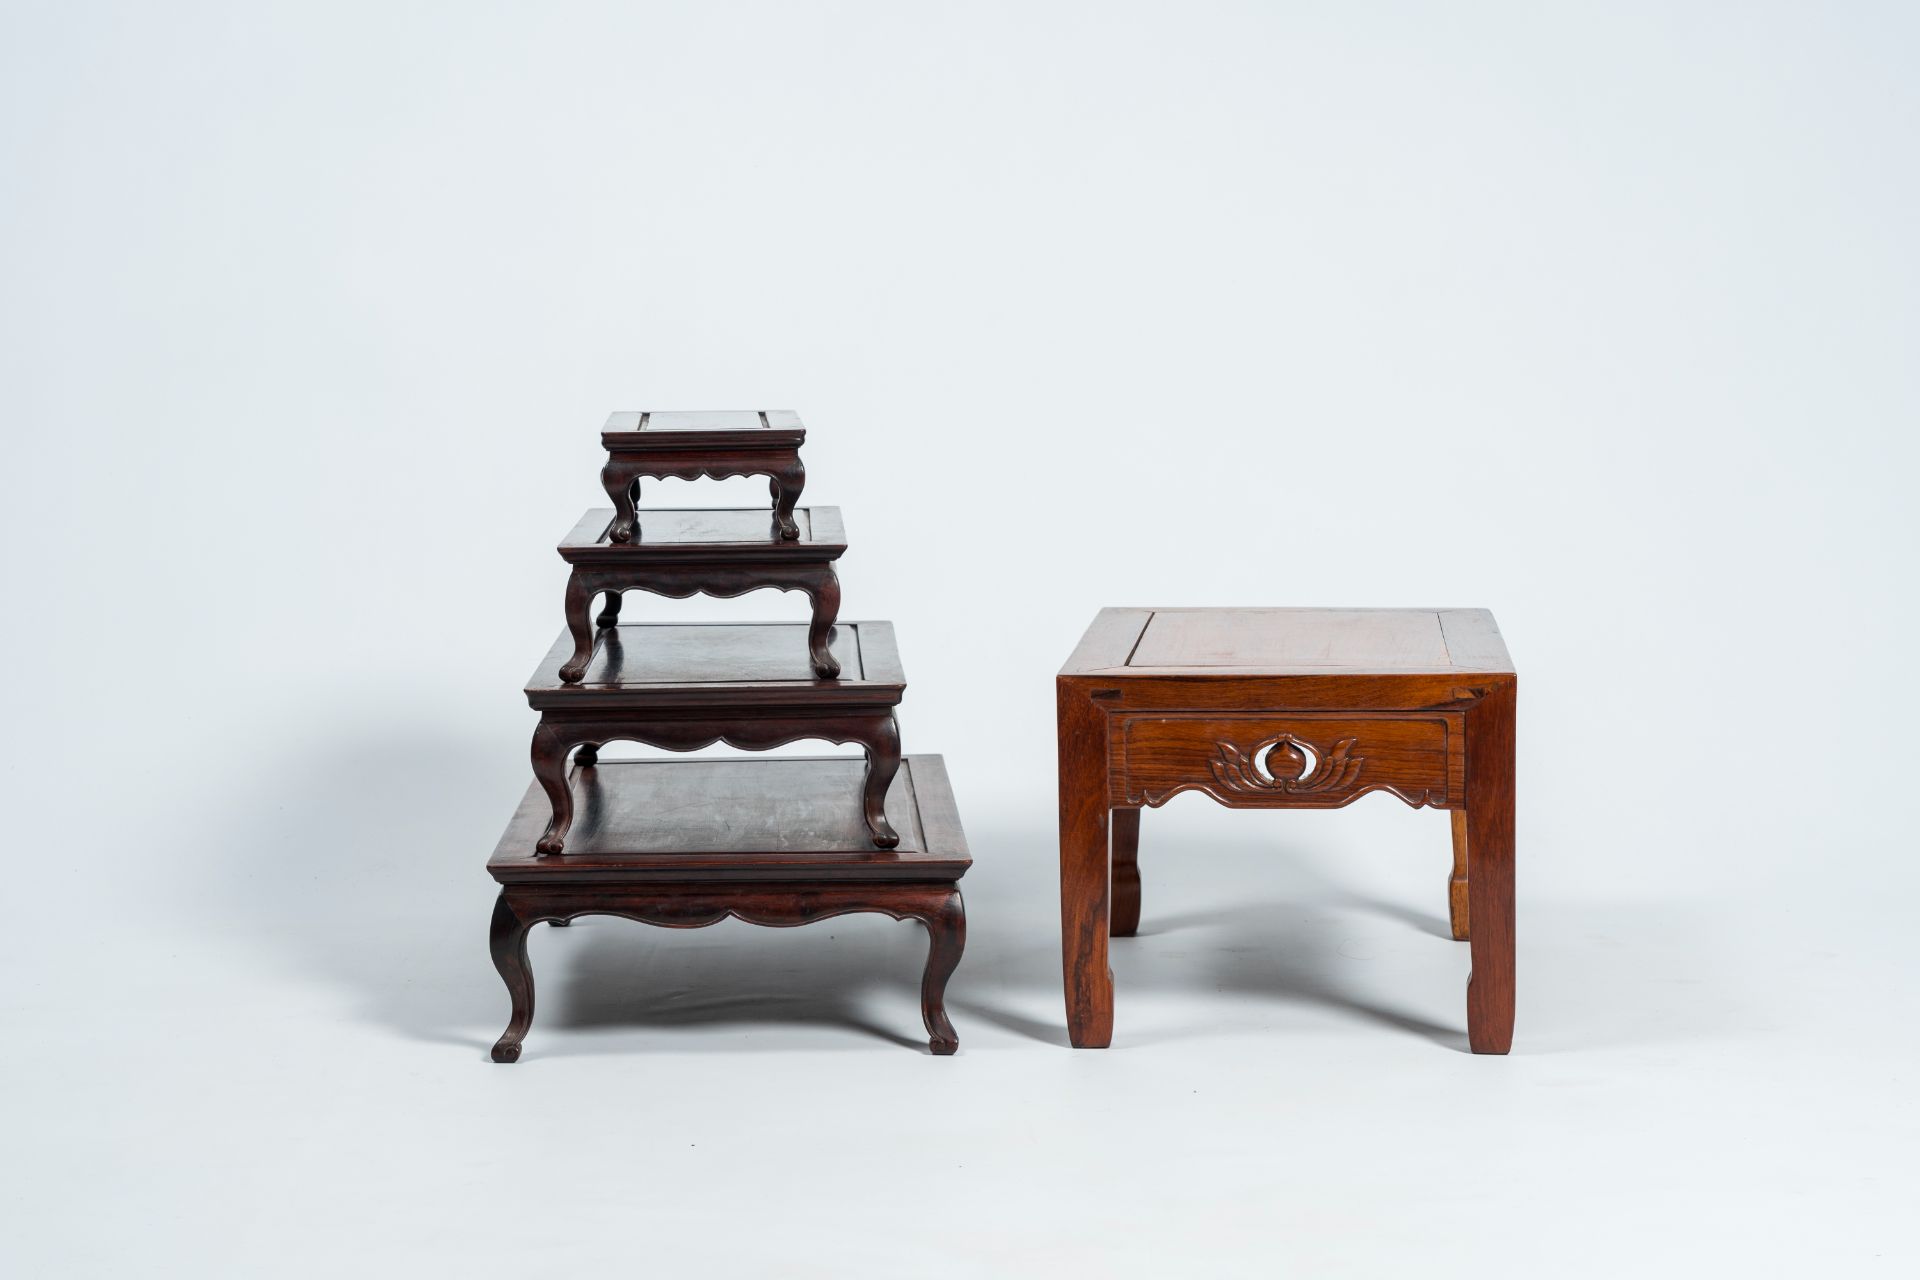 Four Chinese rectangular wood nesting tables and a side table with floral design, 20th C. - Image 4 of 8